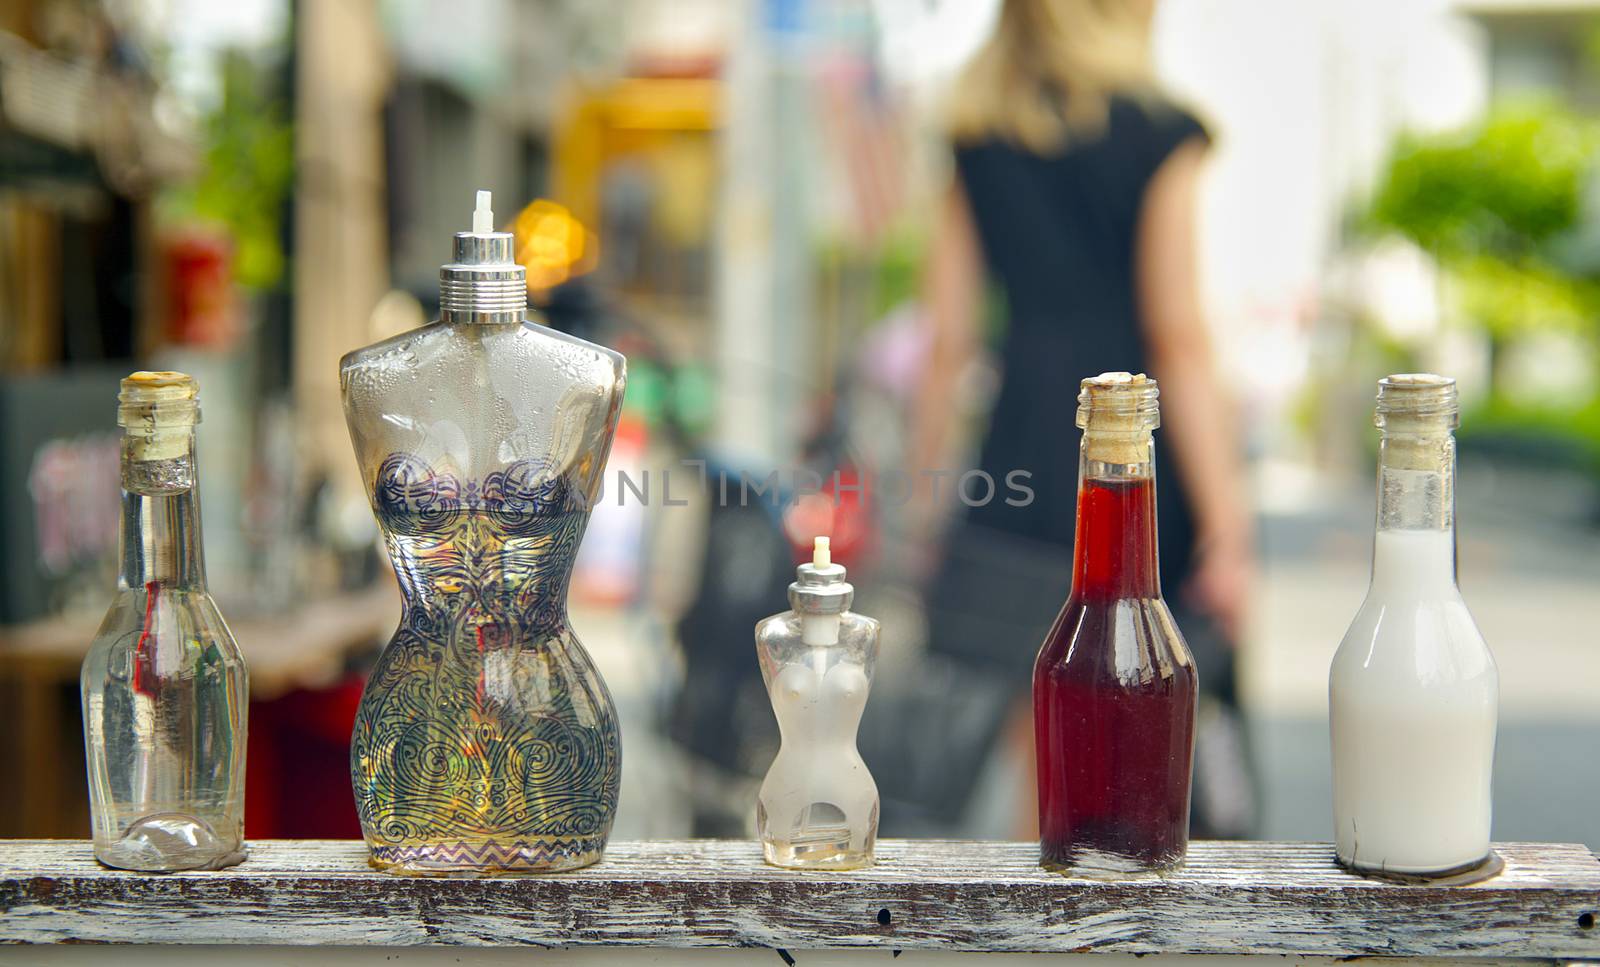 Perfume bottles shaped like the female body with a out of focus woman walking in the background.